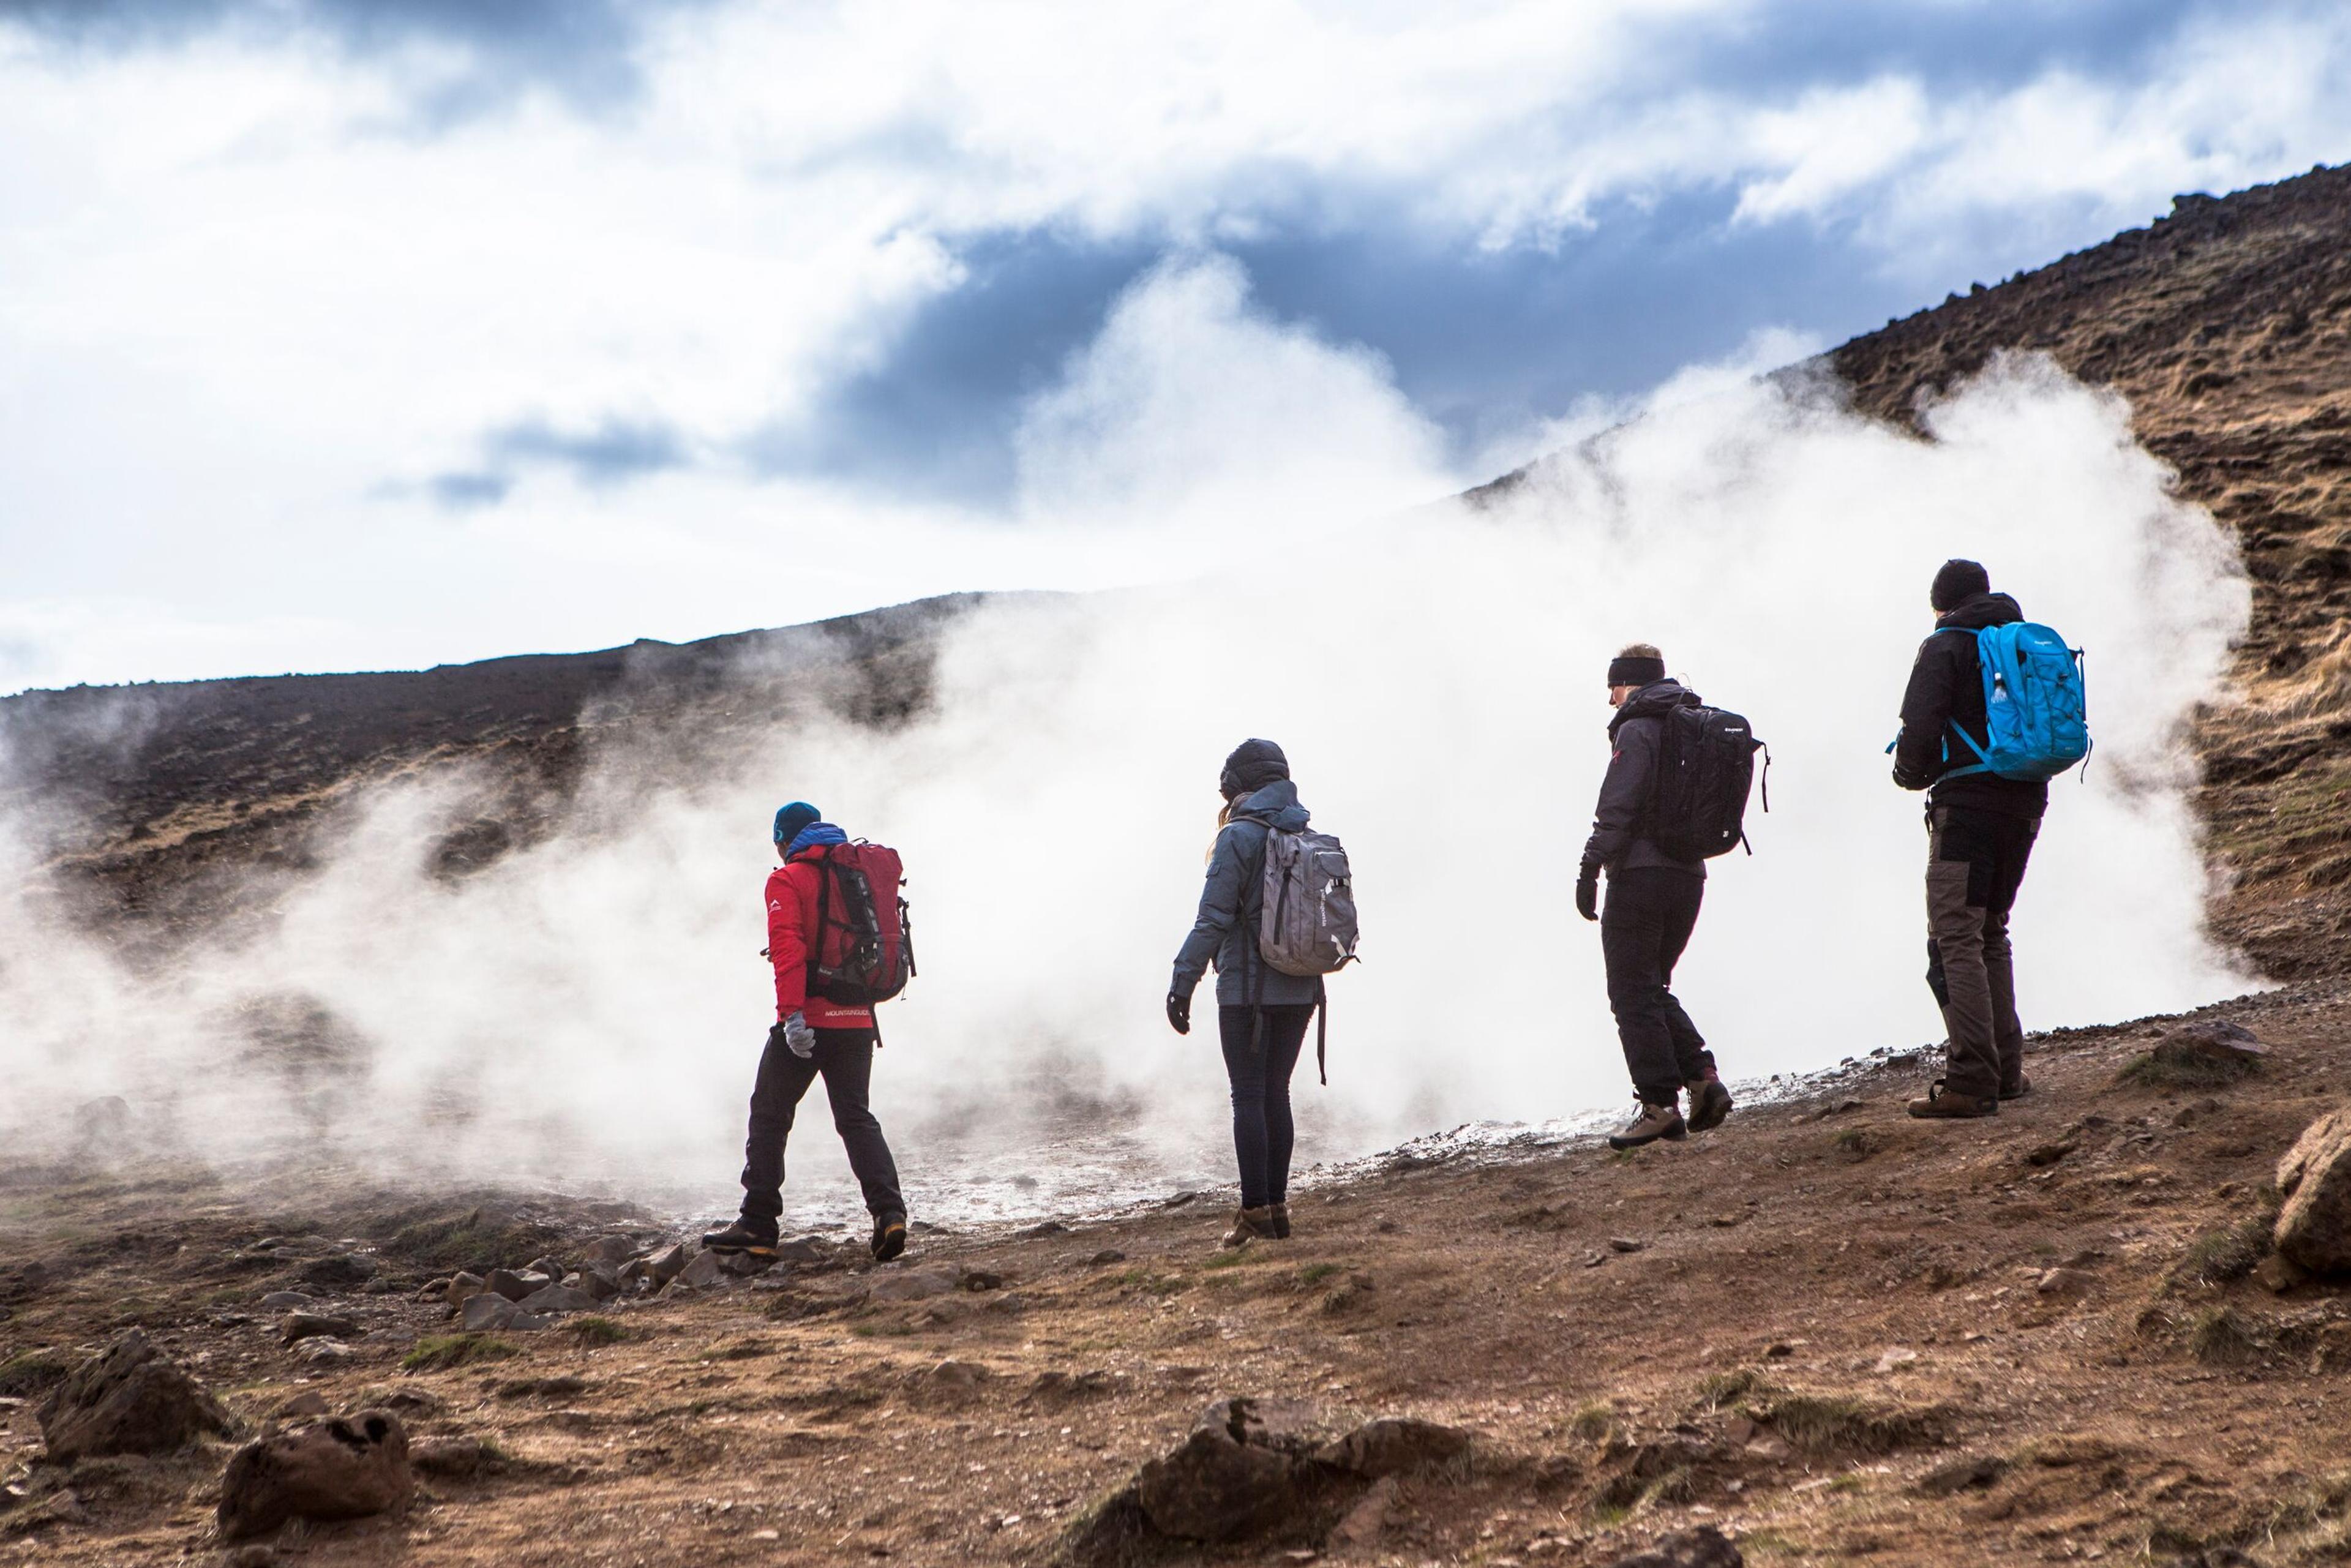 Group of hikers passing by a steam vent in Iceland.